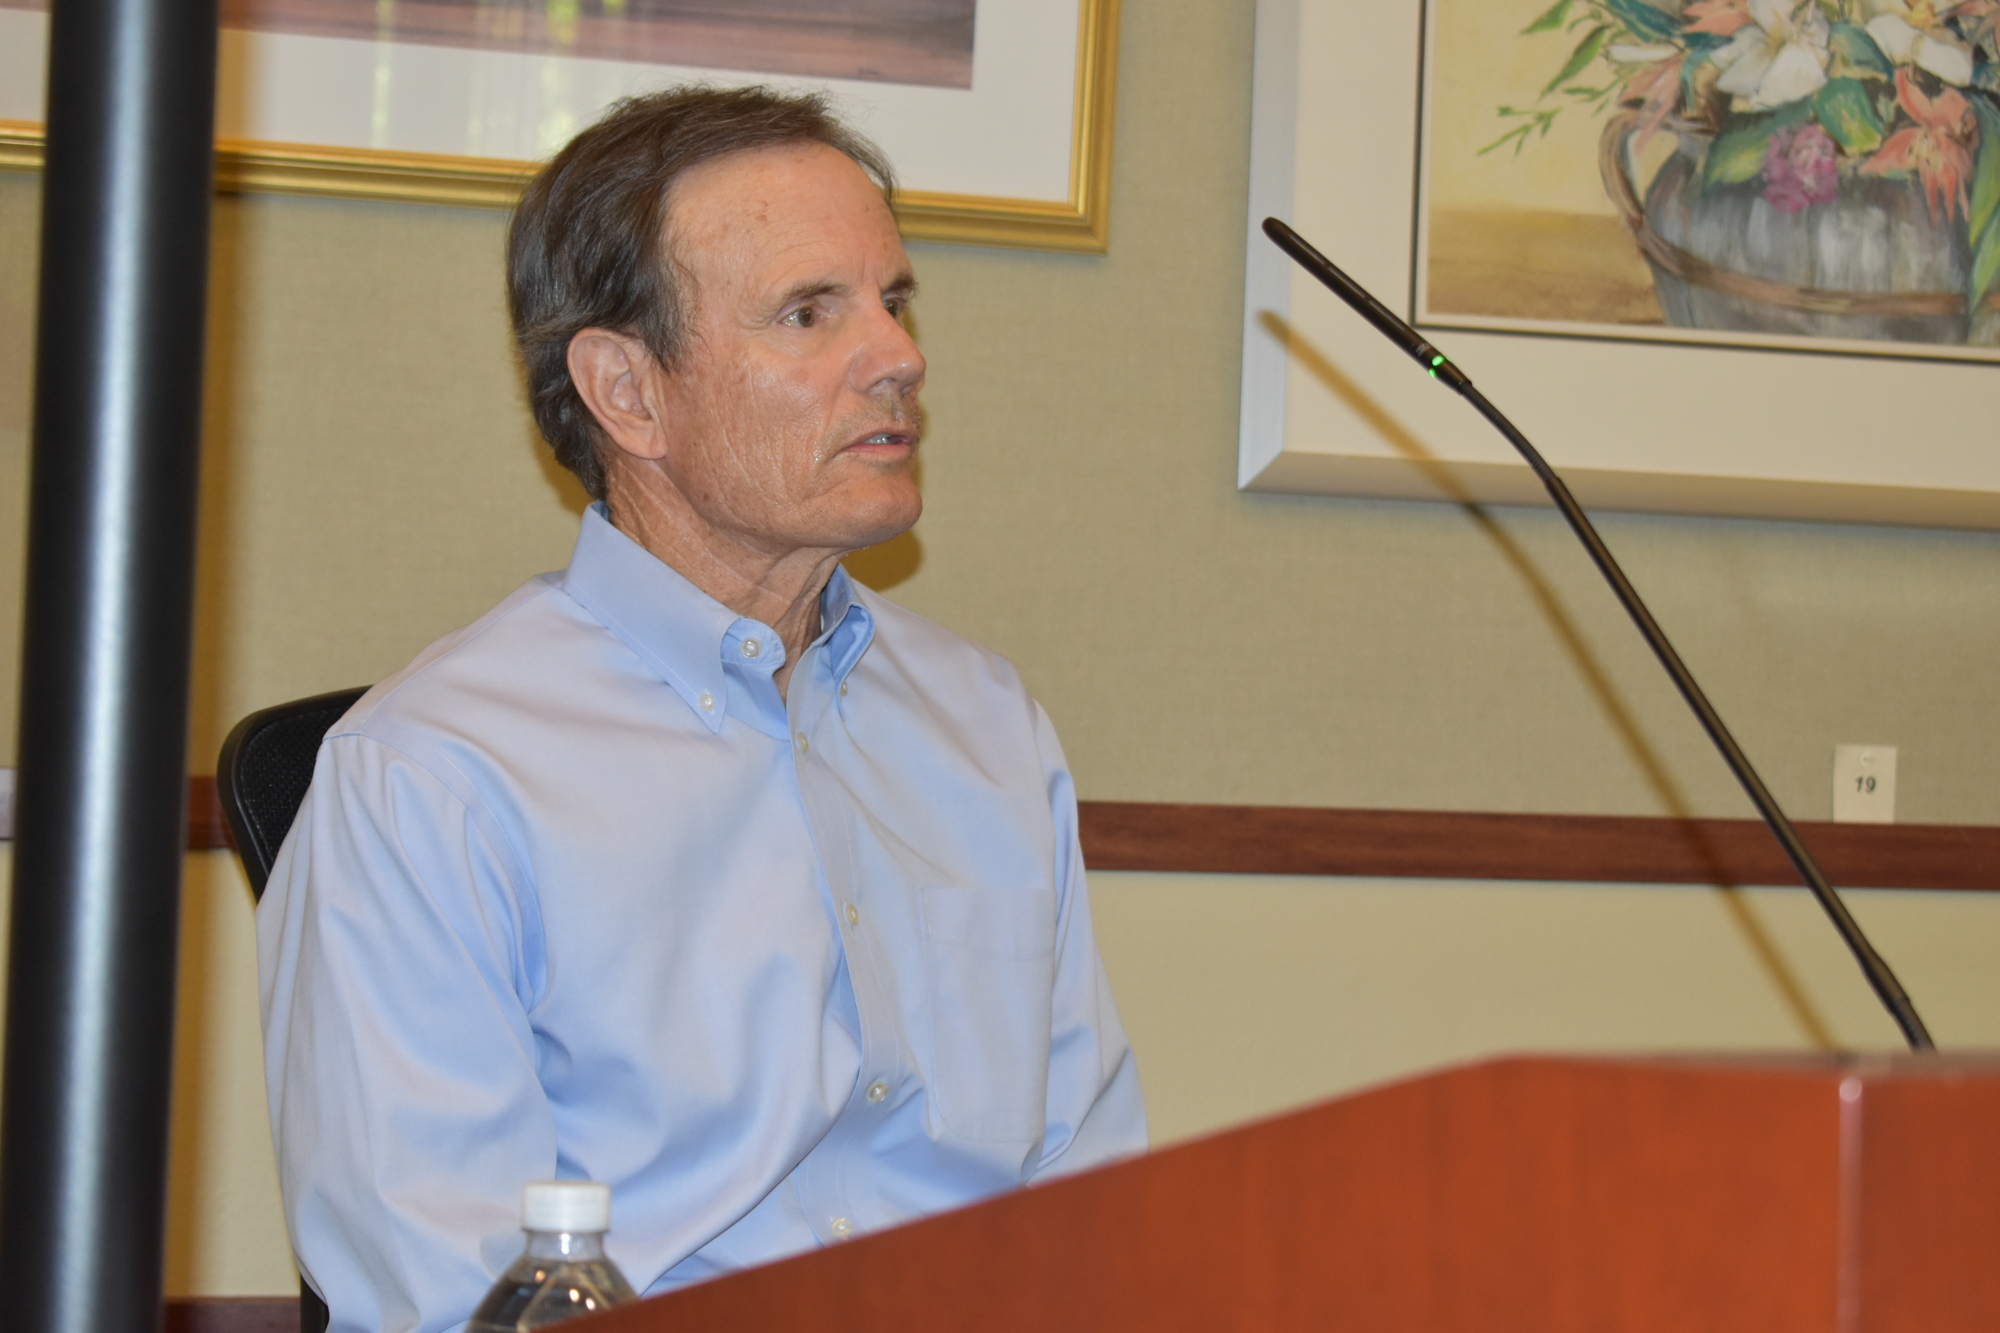 Paul Hylbert is one of three new members of the Longboat Key Planning and Zoning Board.